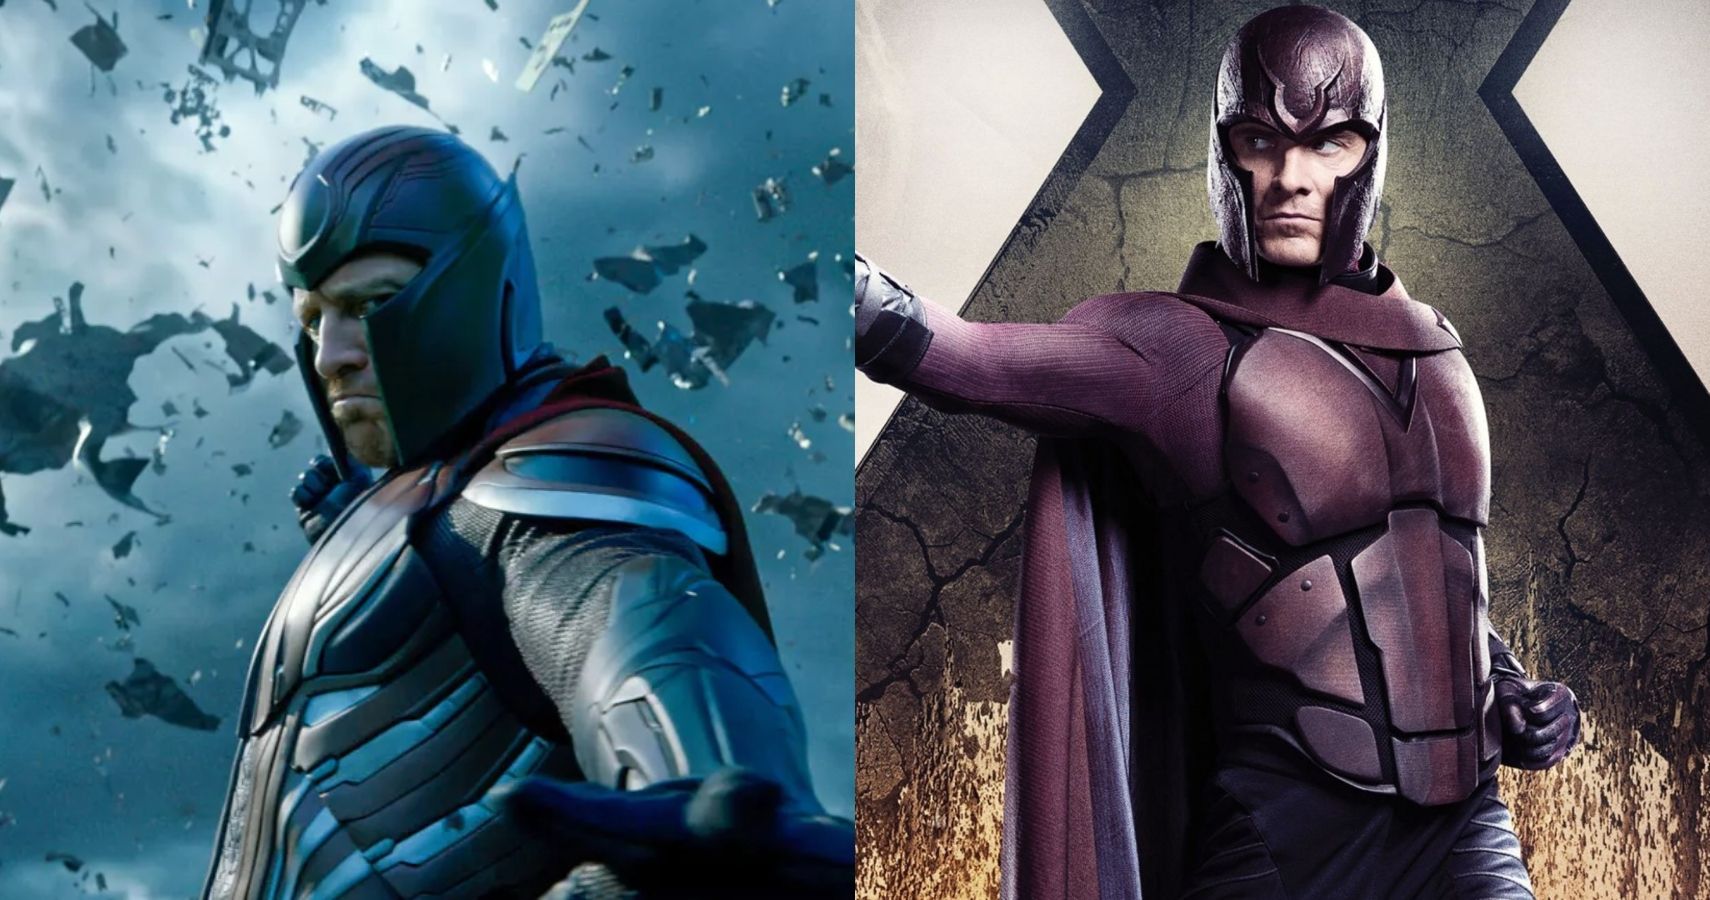 The 10 Worst Things Magneto Has Done Across The XMen Franchise